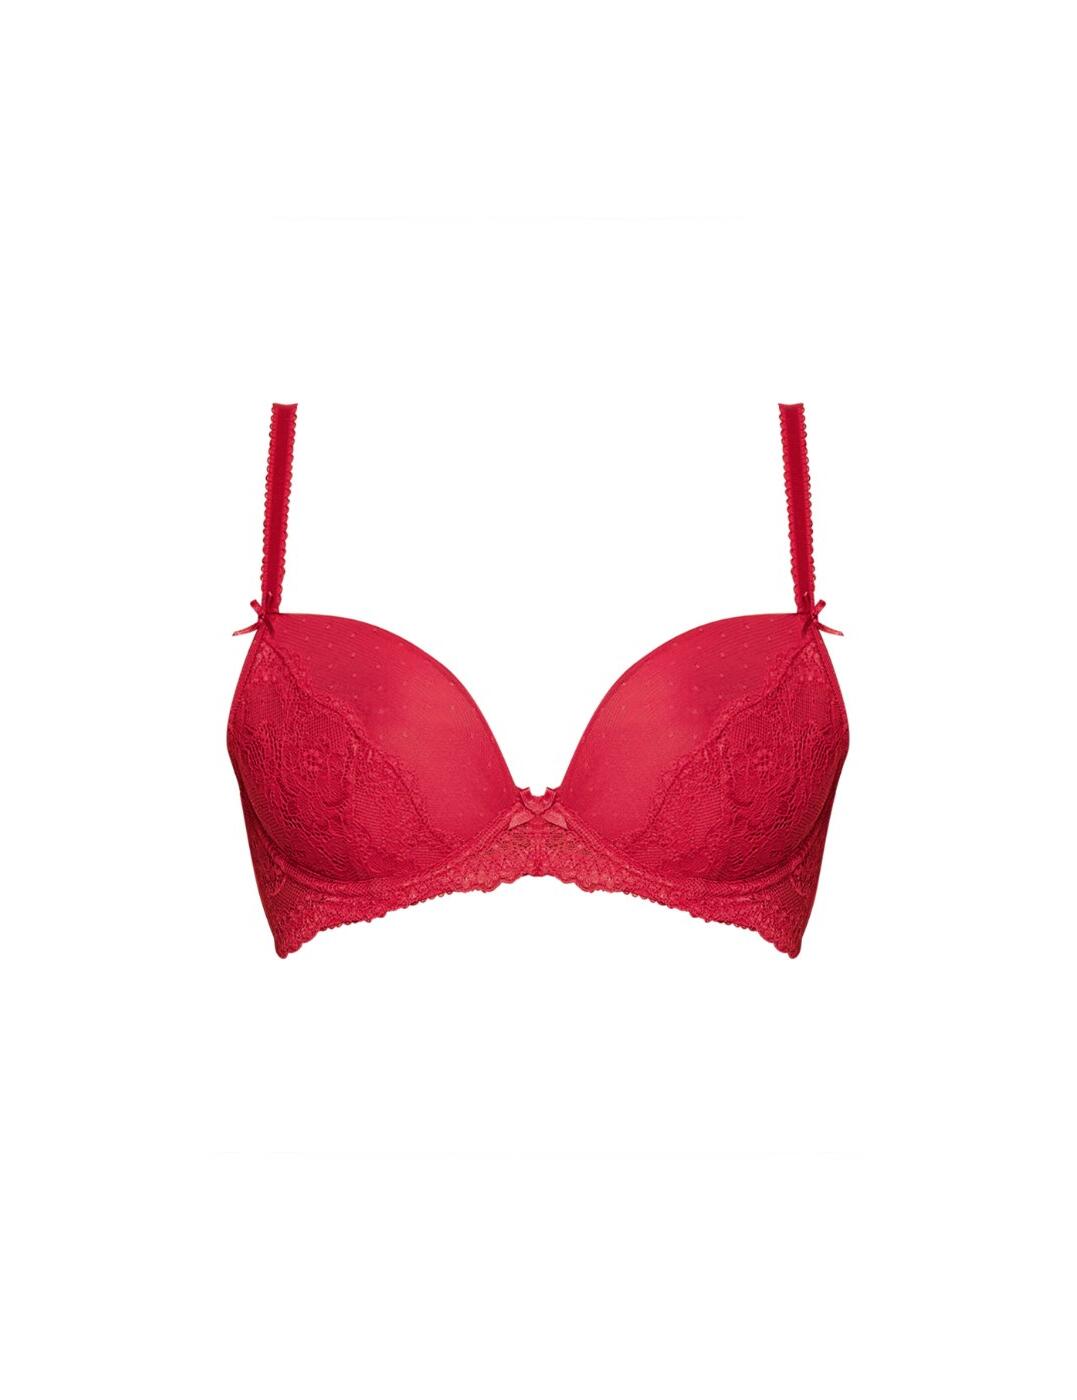 BNWT - Figleaves Juliette Lace T Shirt Bra In Black, Latte And Red